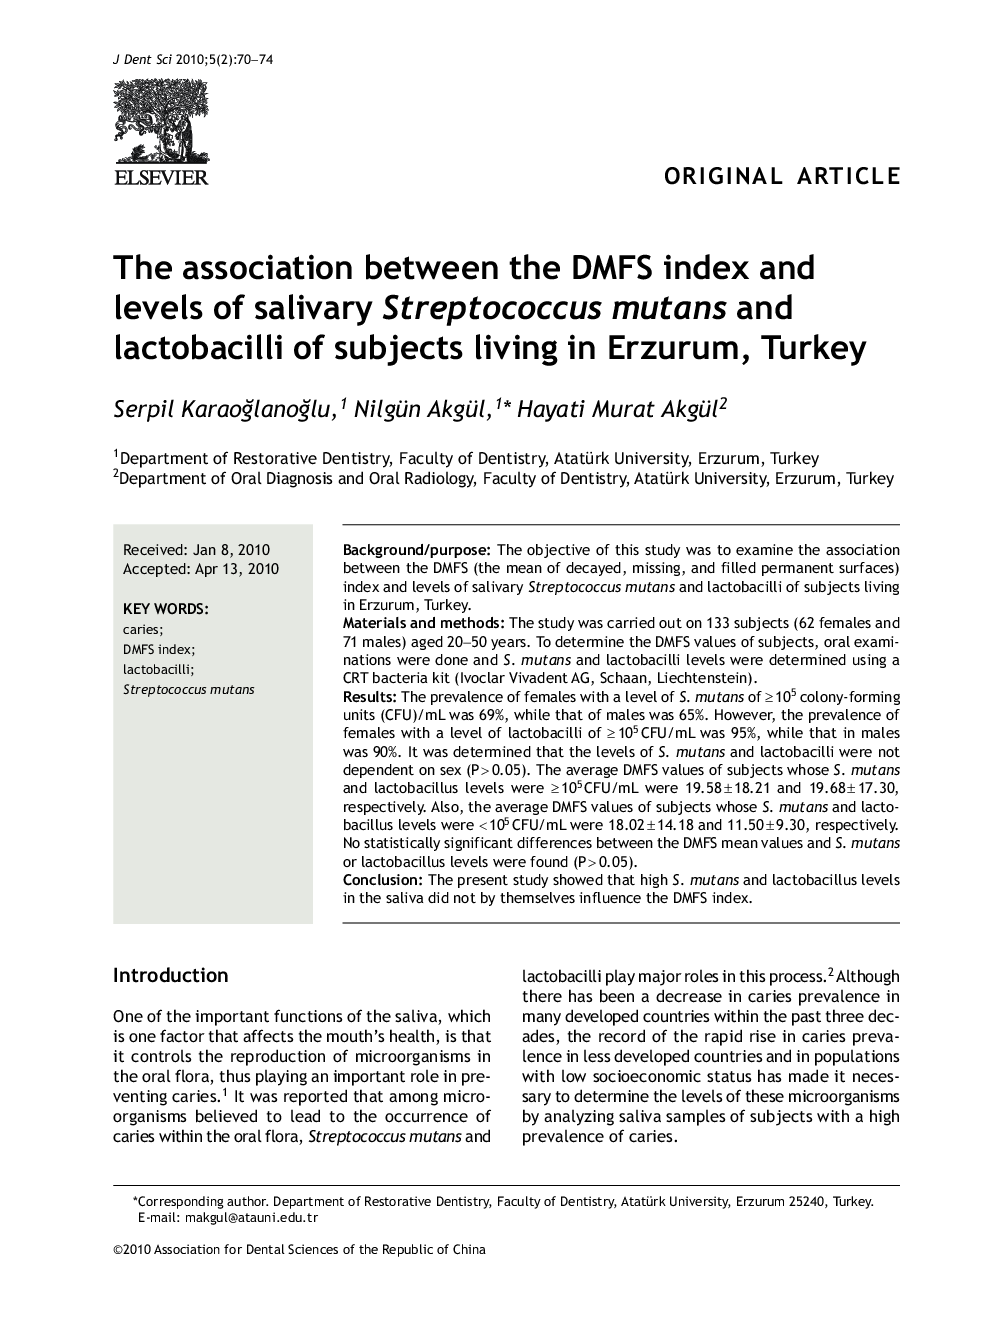 The association between the DMFS index and levels of salivary Streptococcus mutans and lactobacilli of subjects living in Erzurum, Turkey